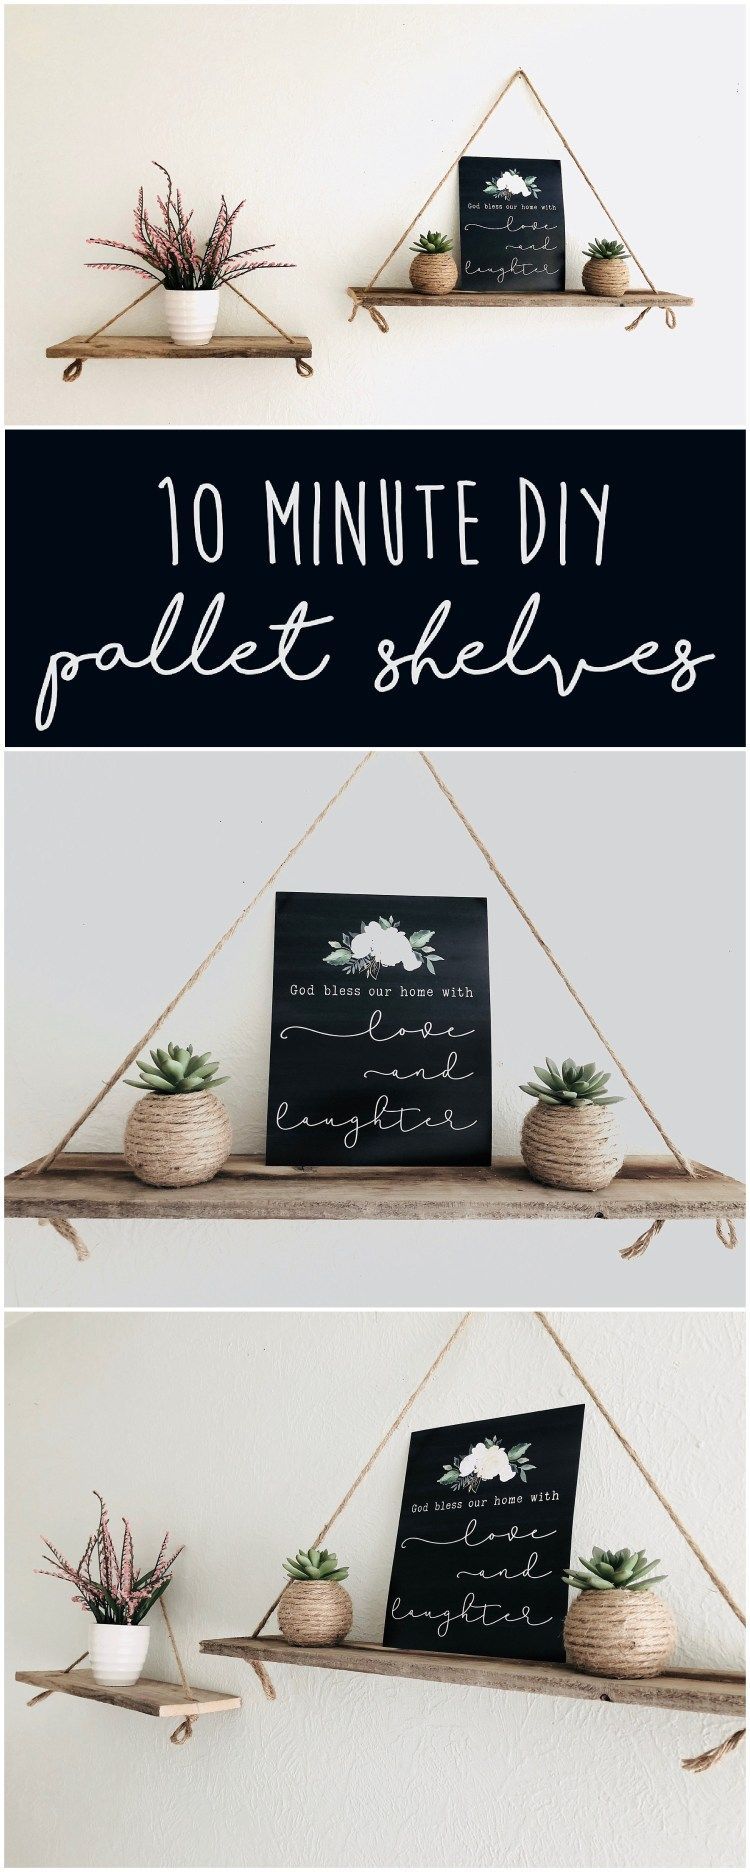 Easy DIY Pallet Shelves - Six Clever Sisters - Easy DIY Pallet Shelves - Six Clever Sisters -   19 diy Shelves easy ideas